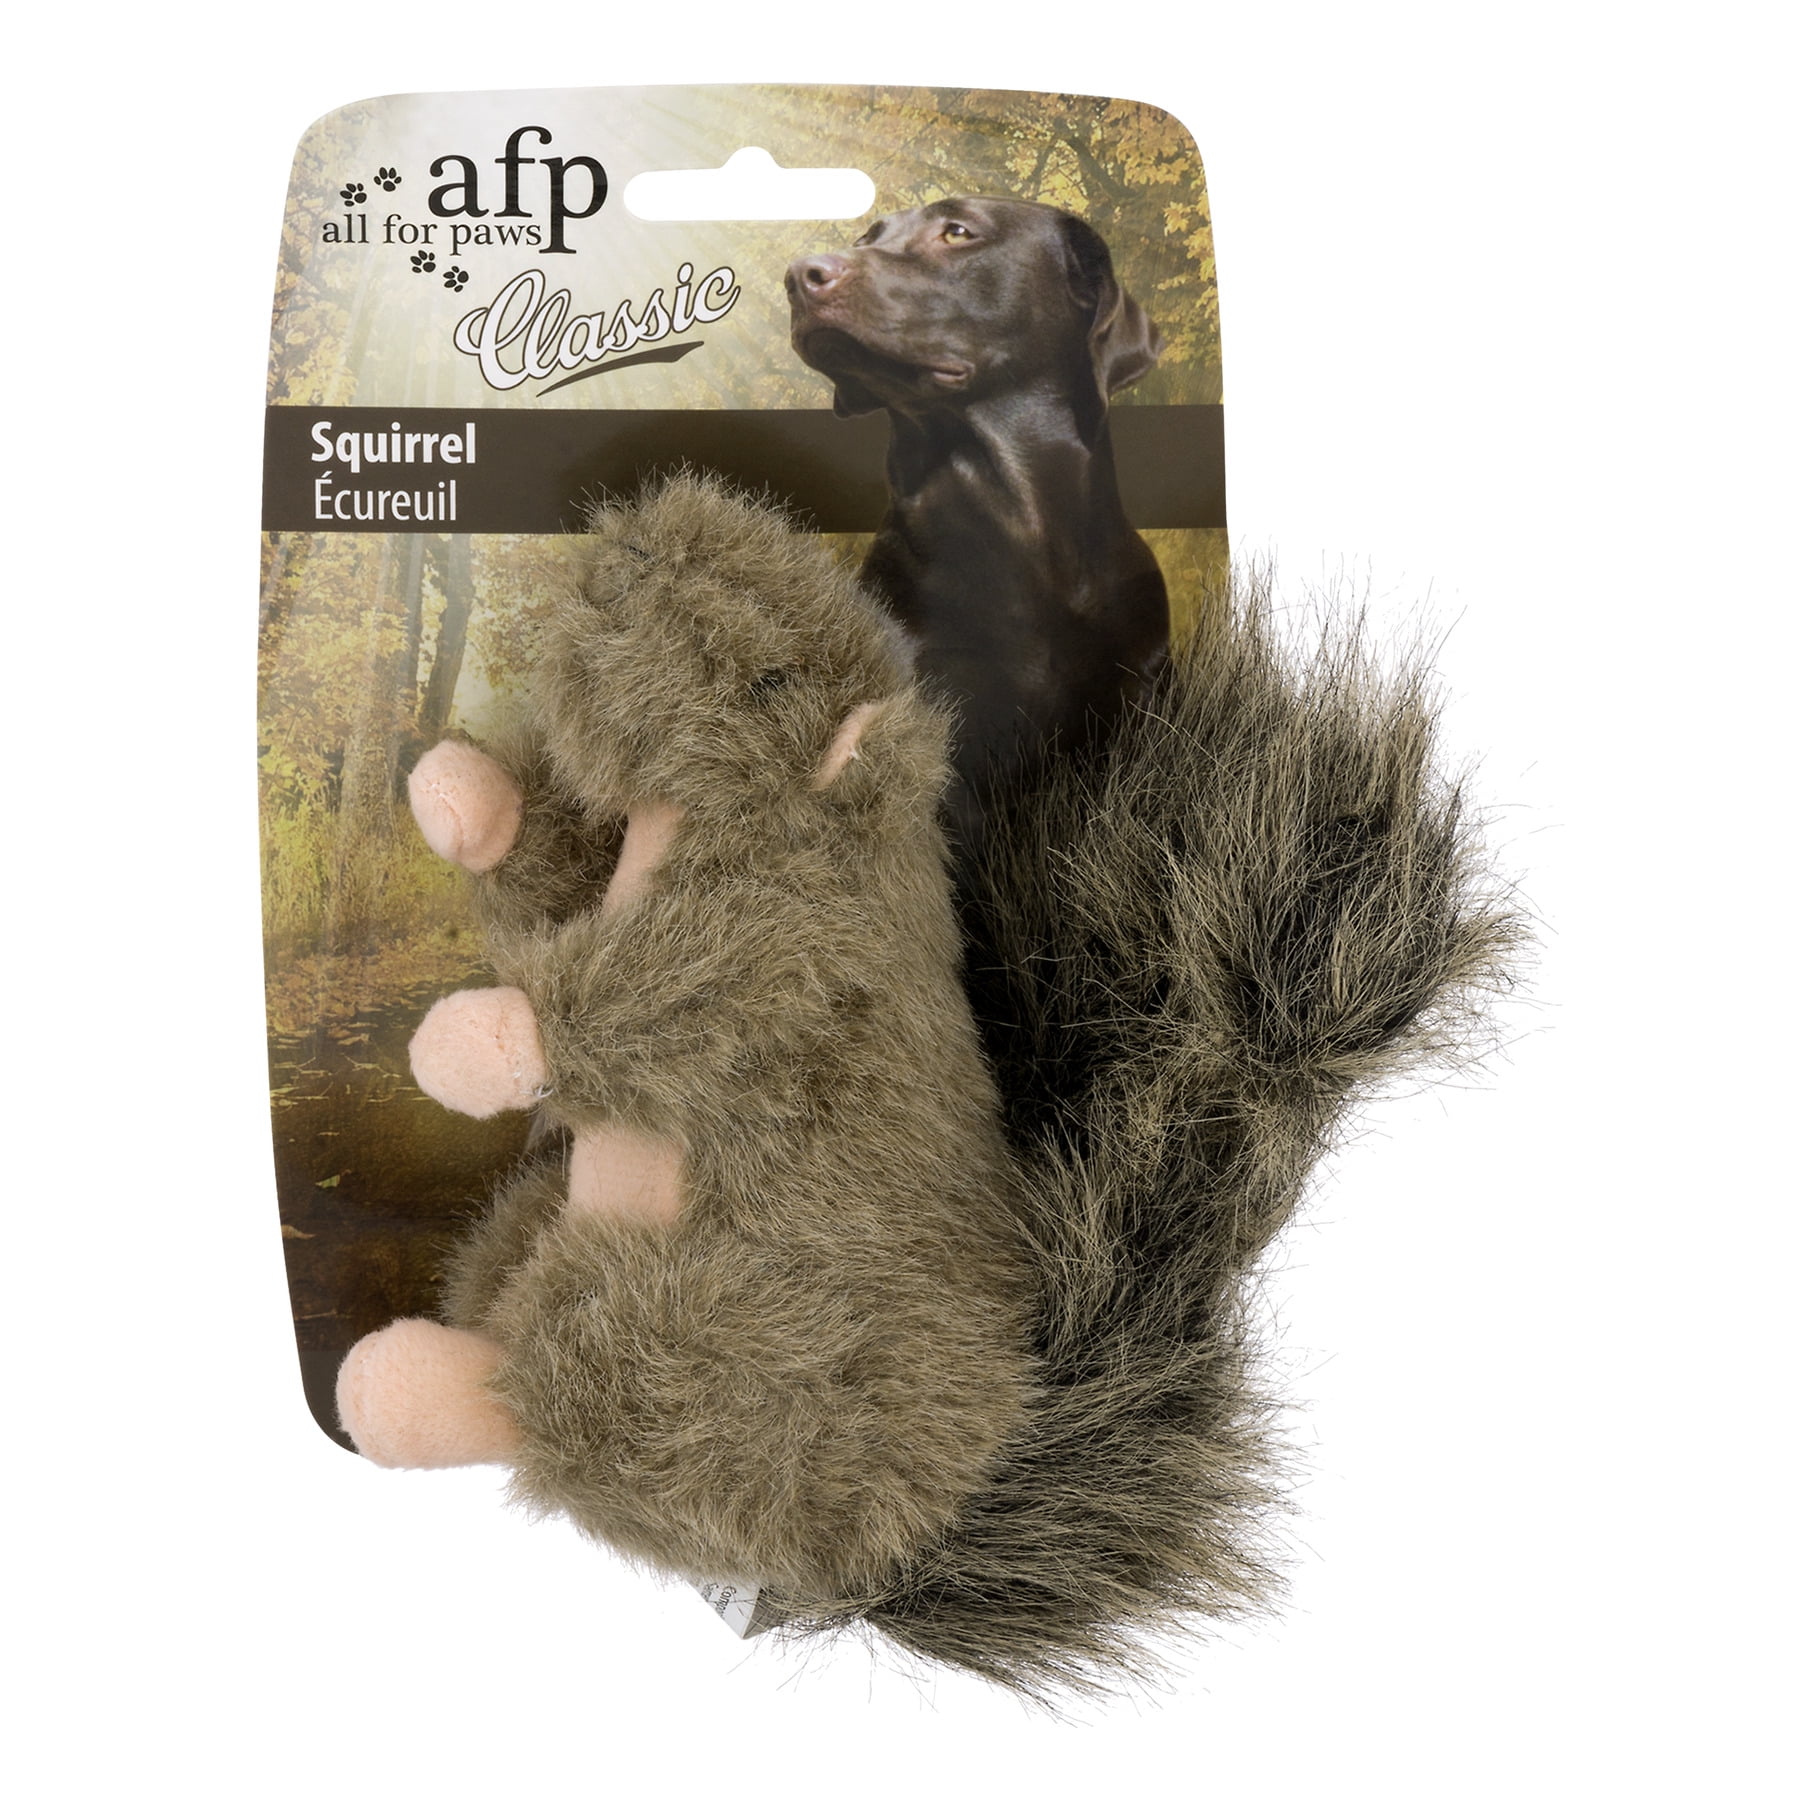 ALL FOR PAWS Pet Squirrel Squeaky Plush Toys Tree Trunk Burrow with 2 Cute Squeaky Squirrel -Hide and Seek Activity for Dogs 25 x 30 x 18 cm /10 x 11.7 x 7 Inch